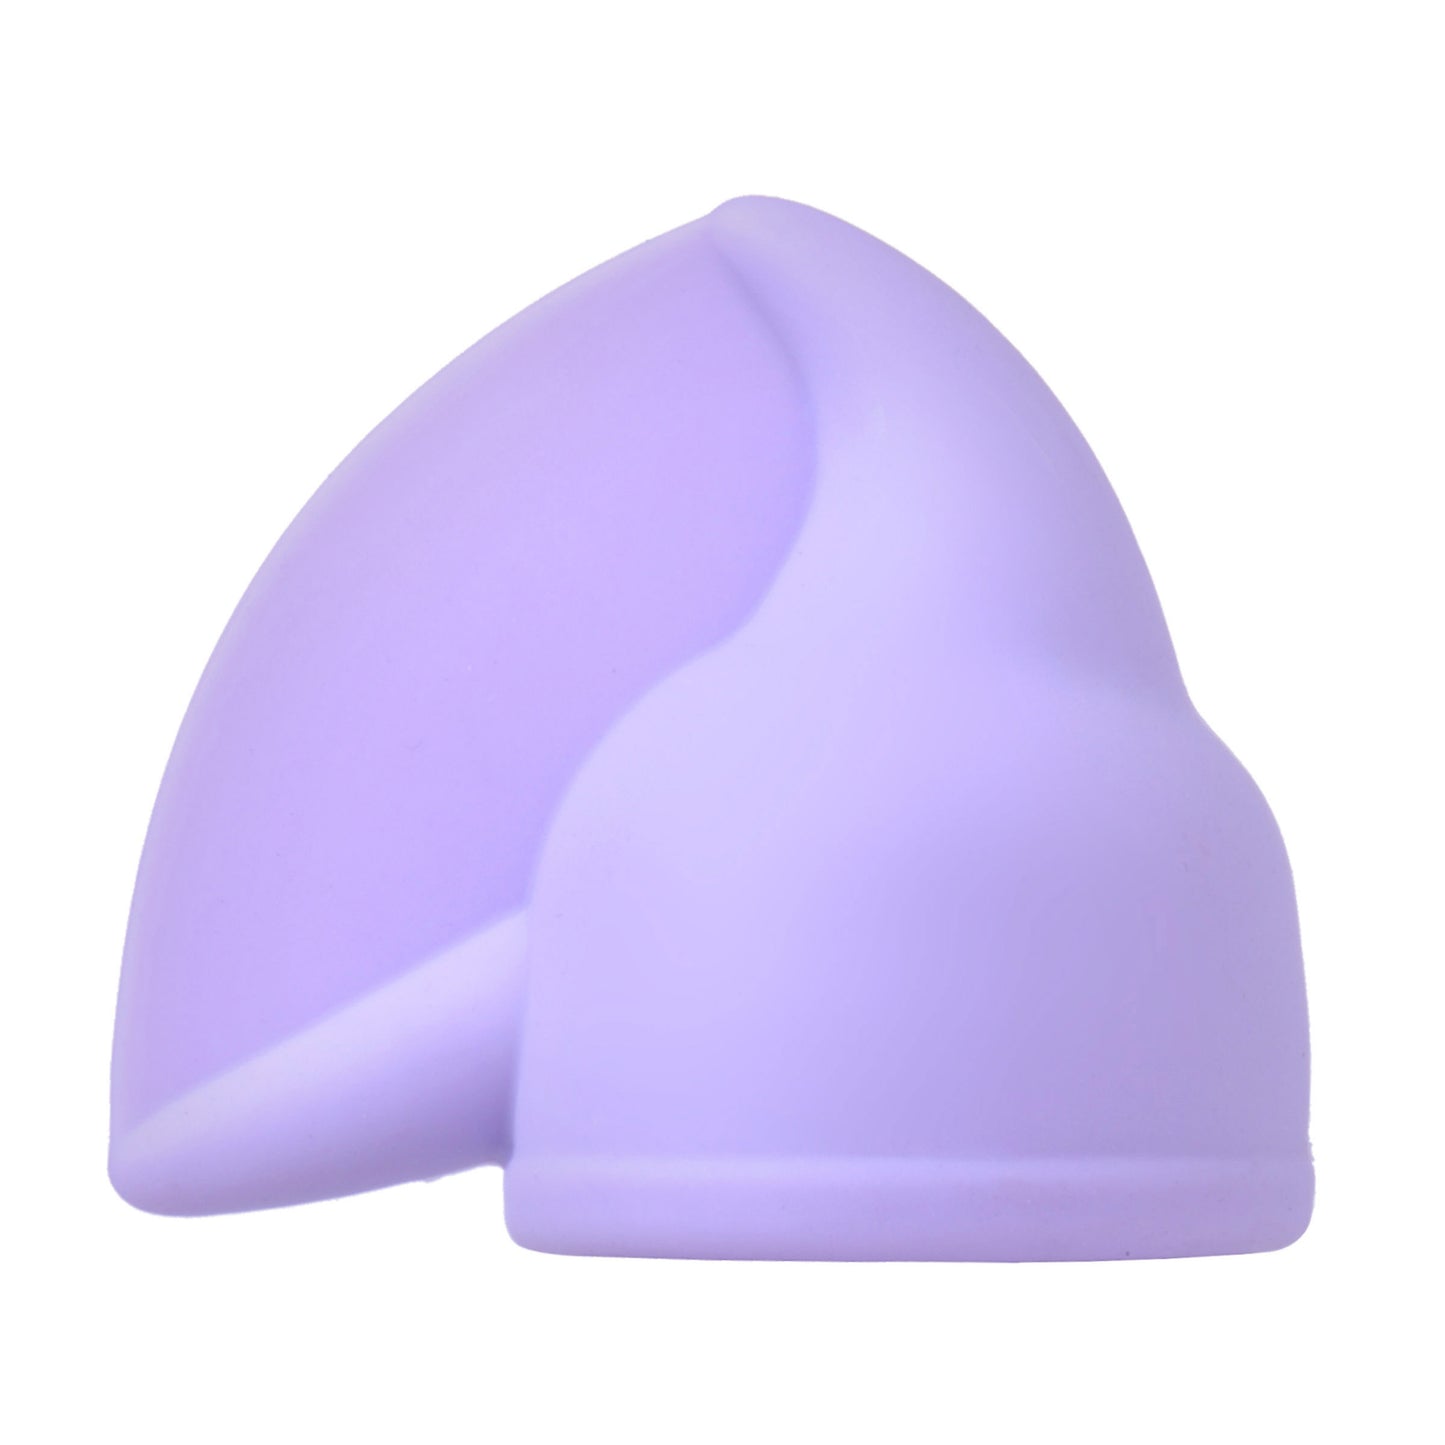 Flutter Tip Silicone Wand Attachment - UABDSM